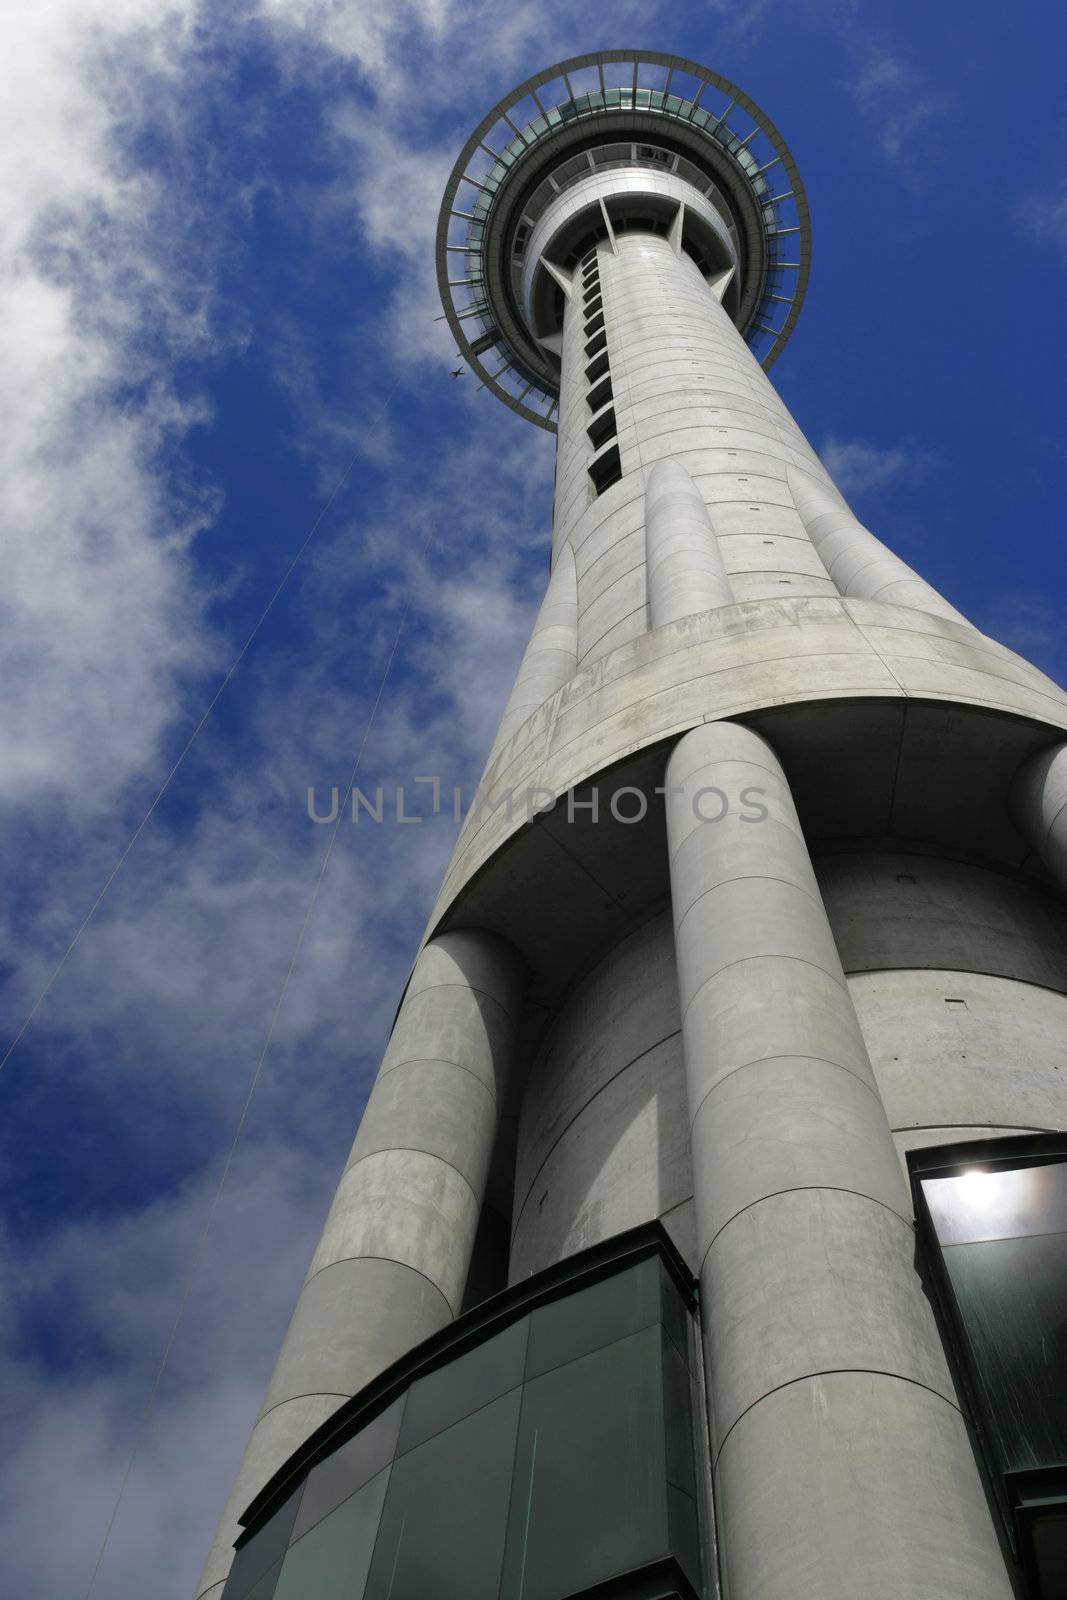 A worm's eye view of the Skytower in Auckland, New Zealand.  On the left of the platform, a jumper is falling from the jumping platform.
